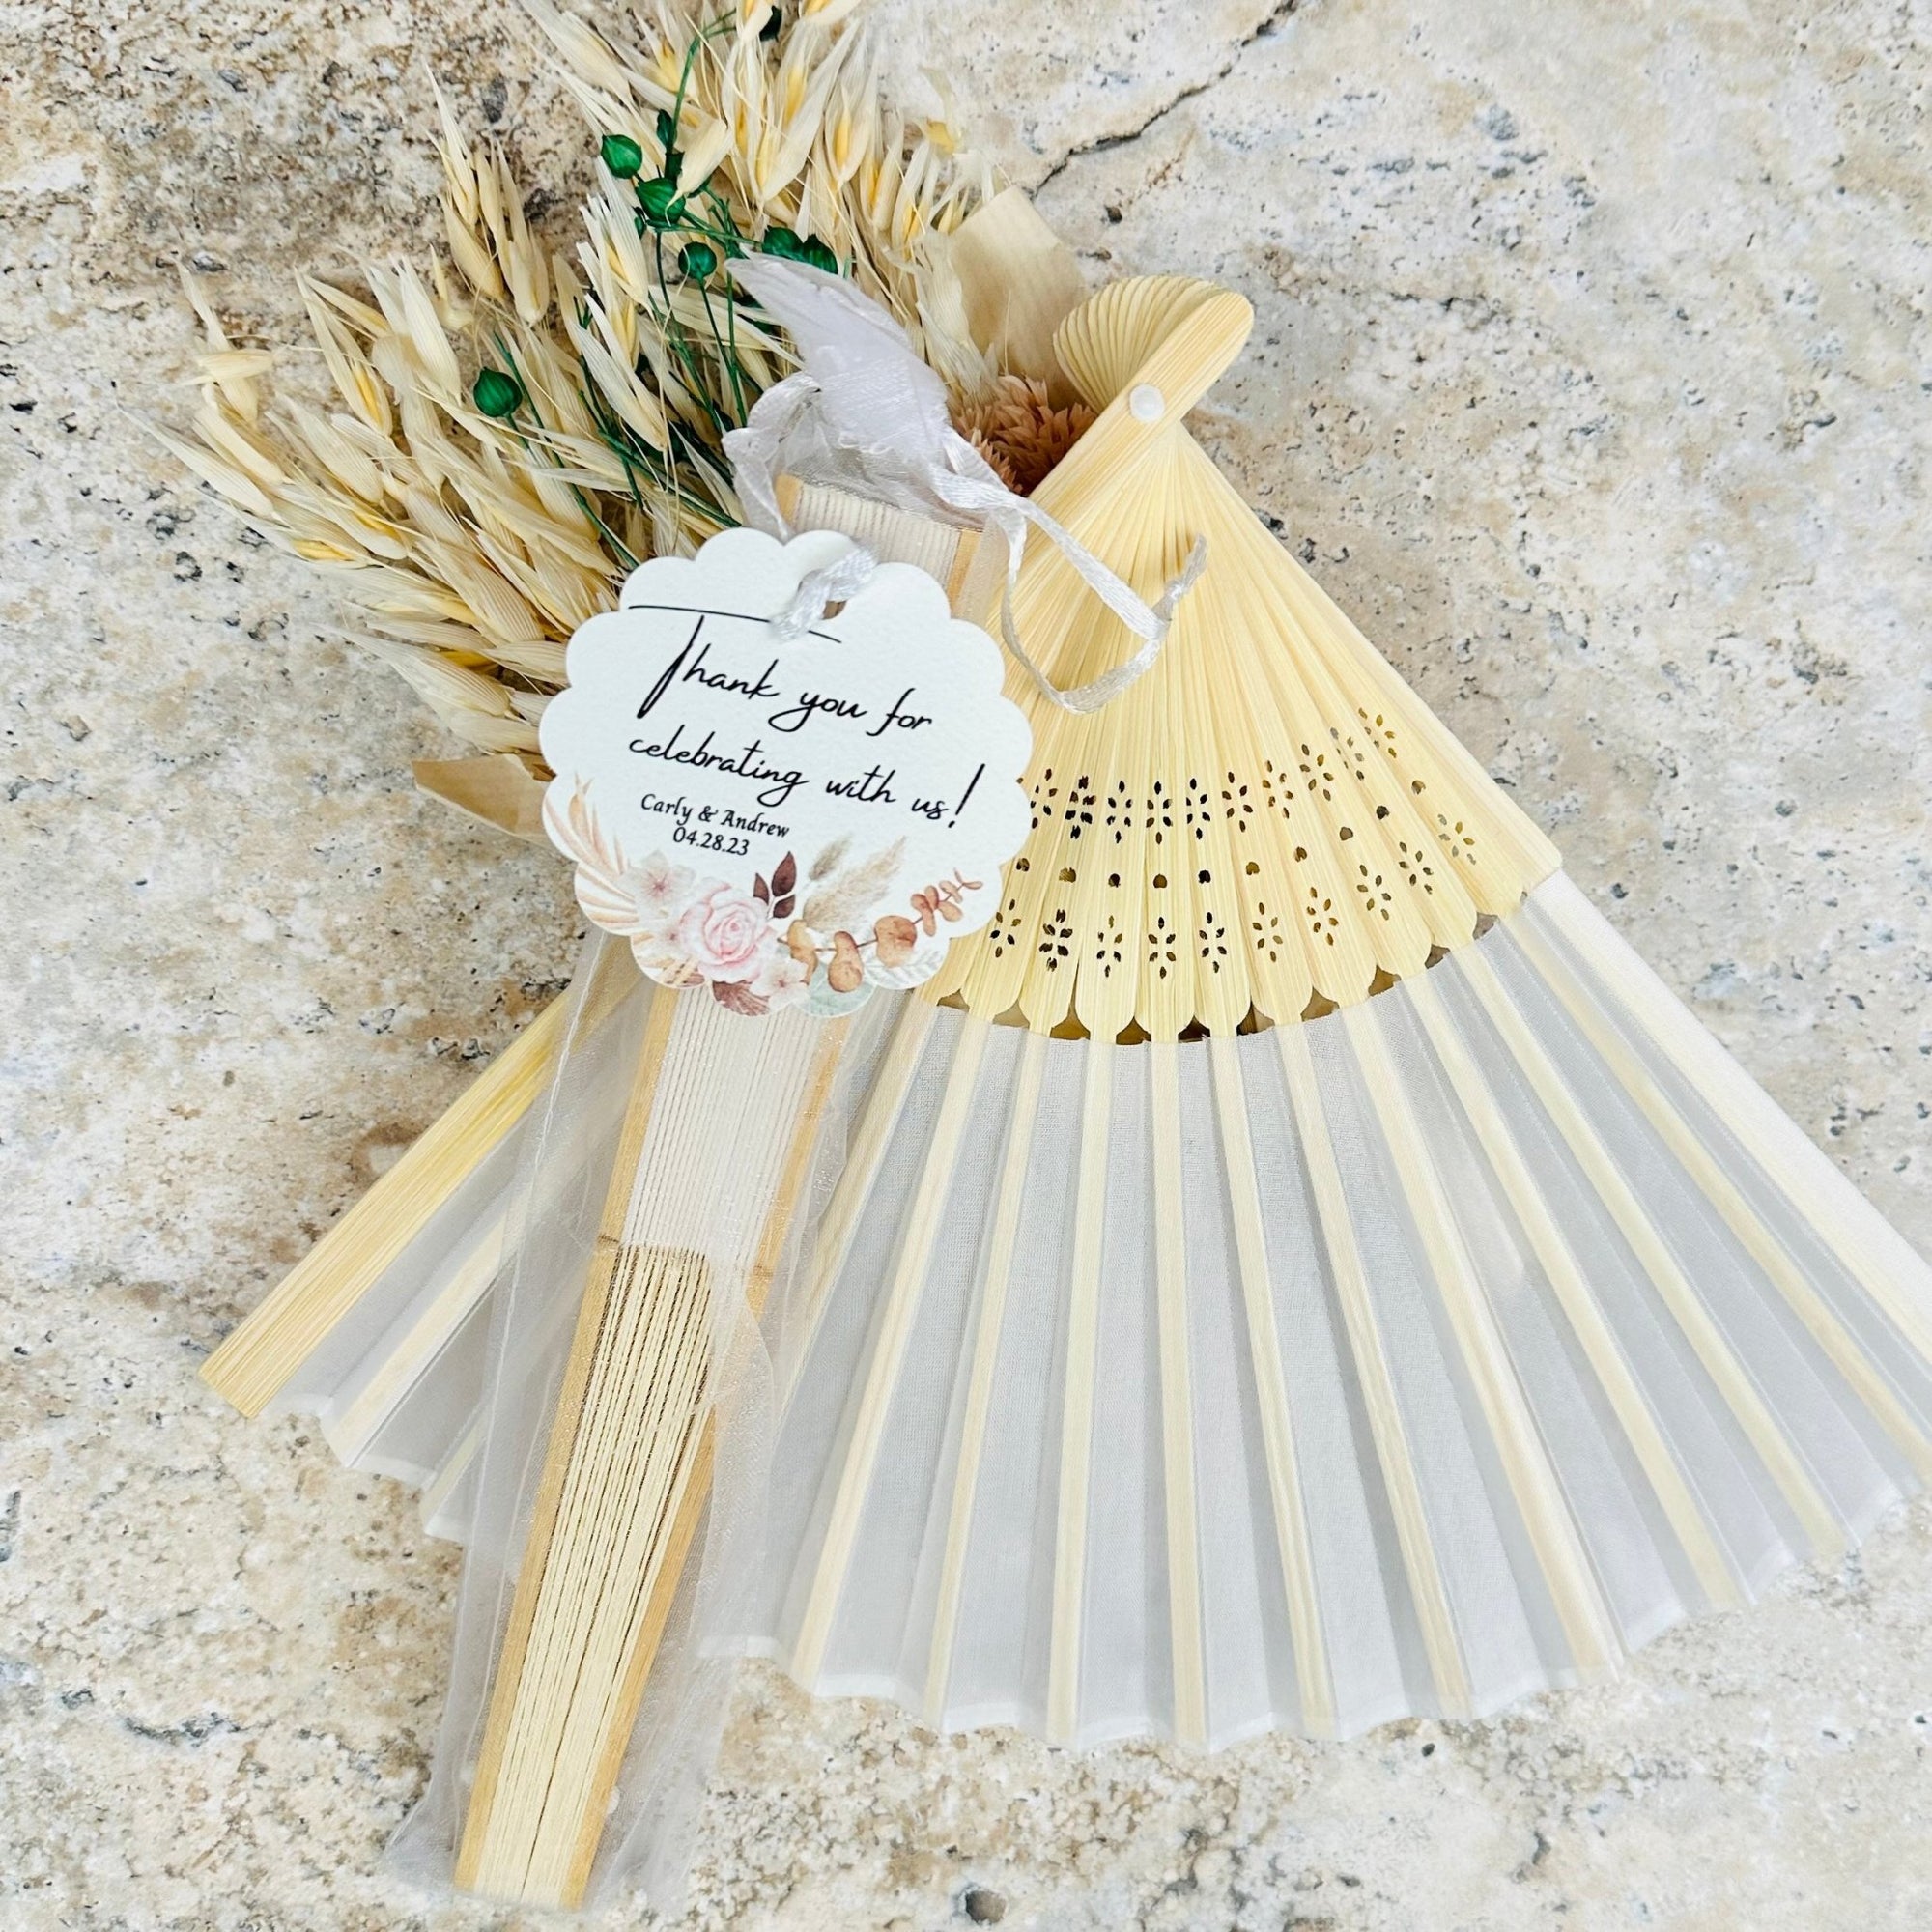 25 Hand Fan Wedding Favors to Keep Your Guests Cool (from $1.39) - Forever  Wedding Favors